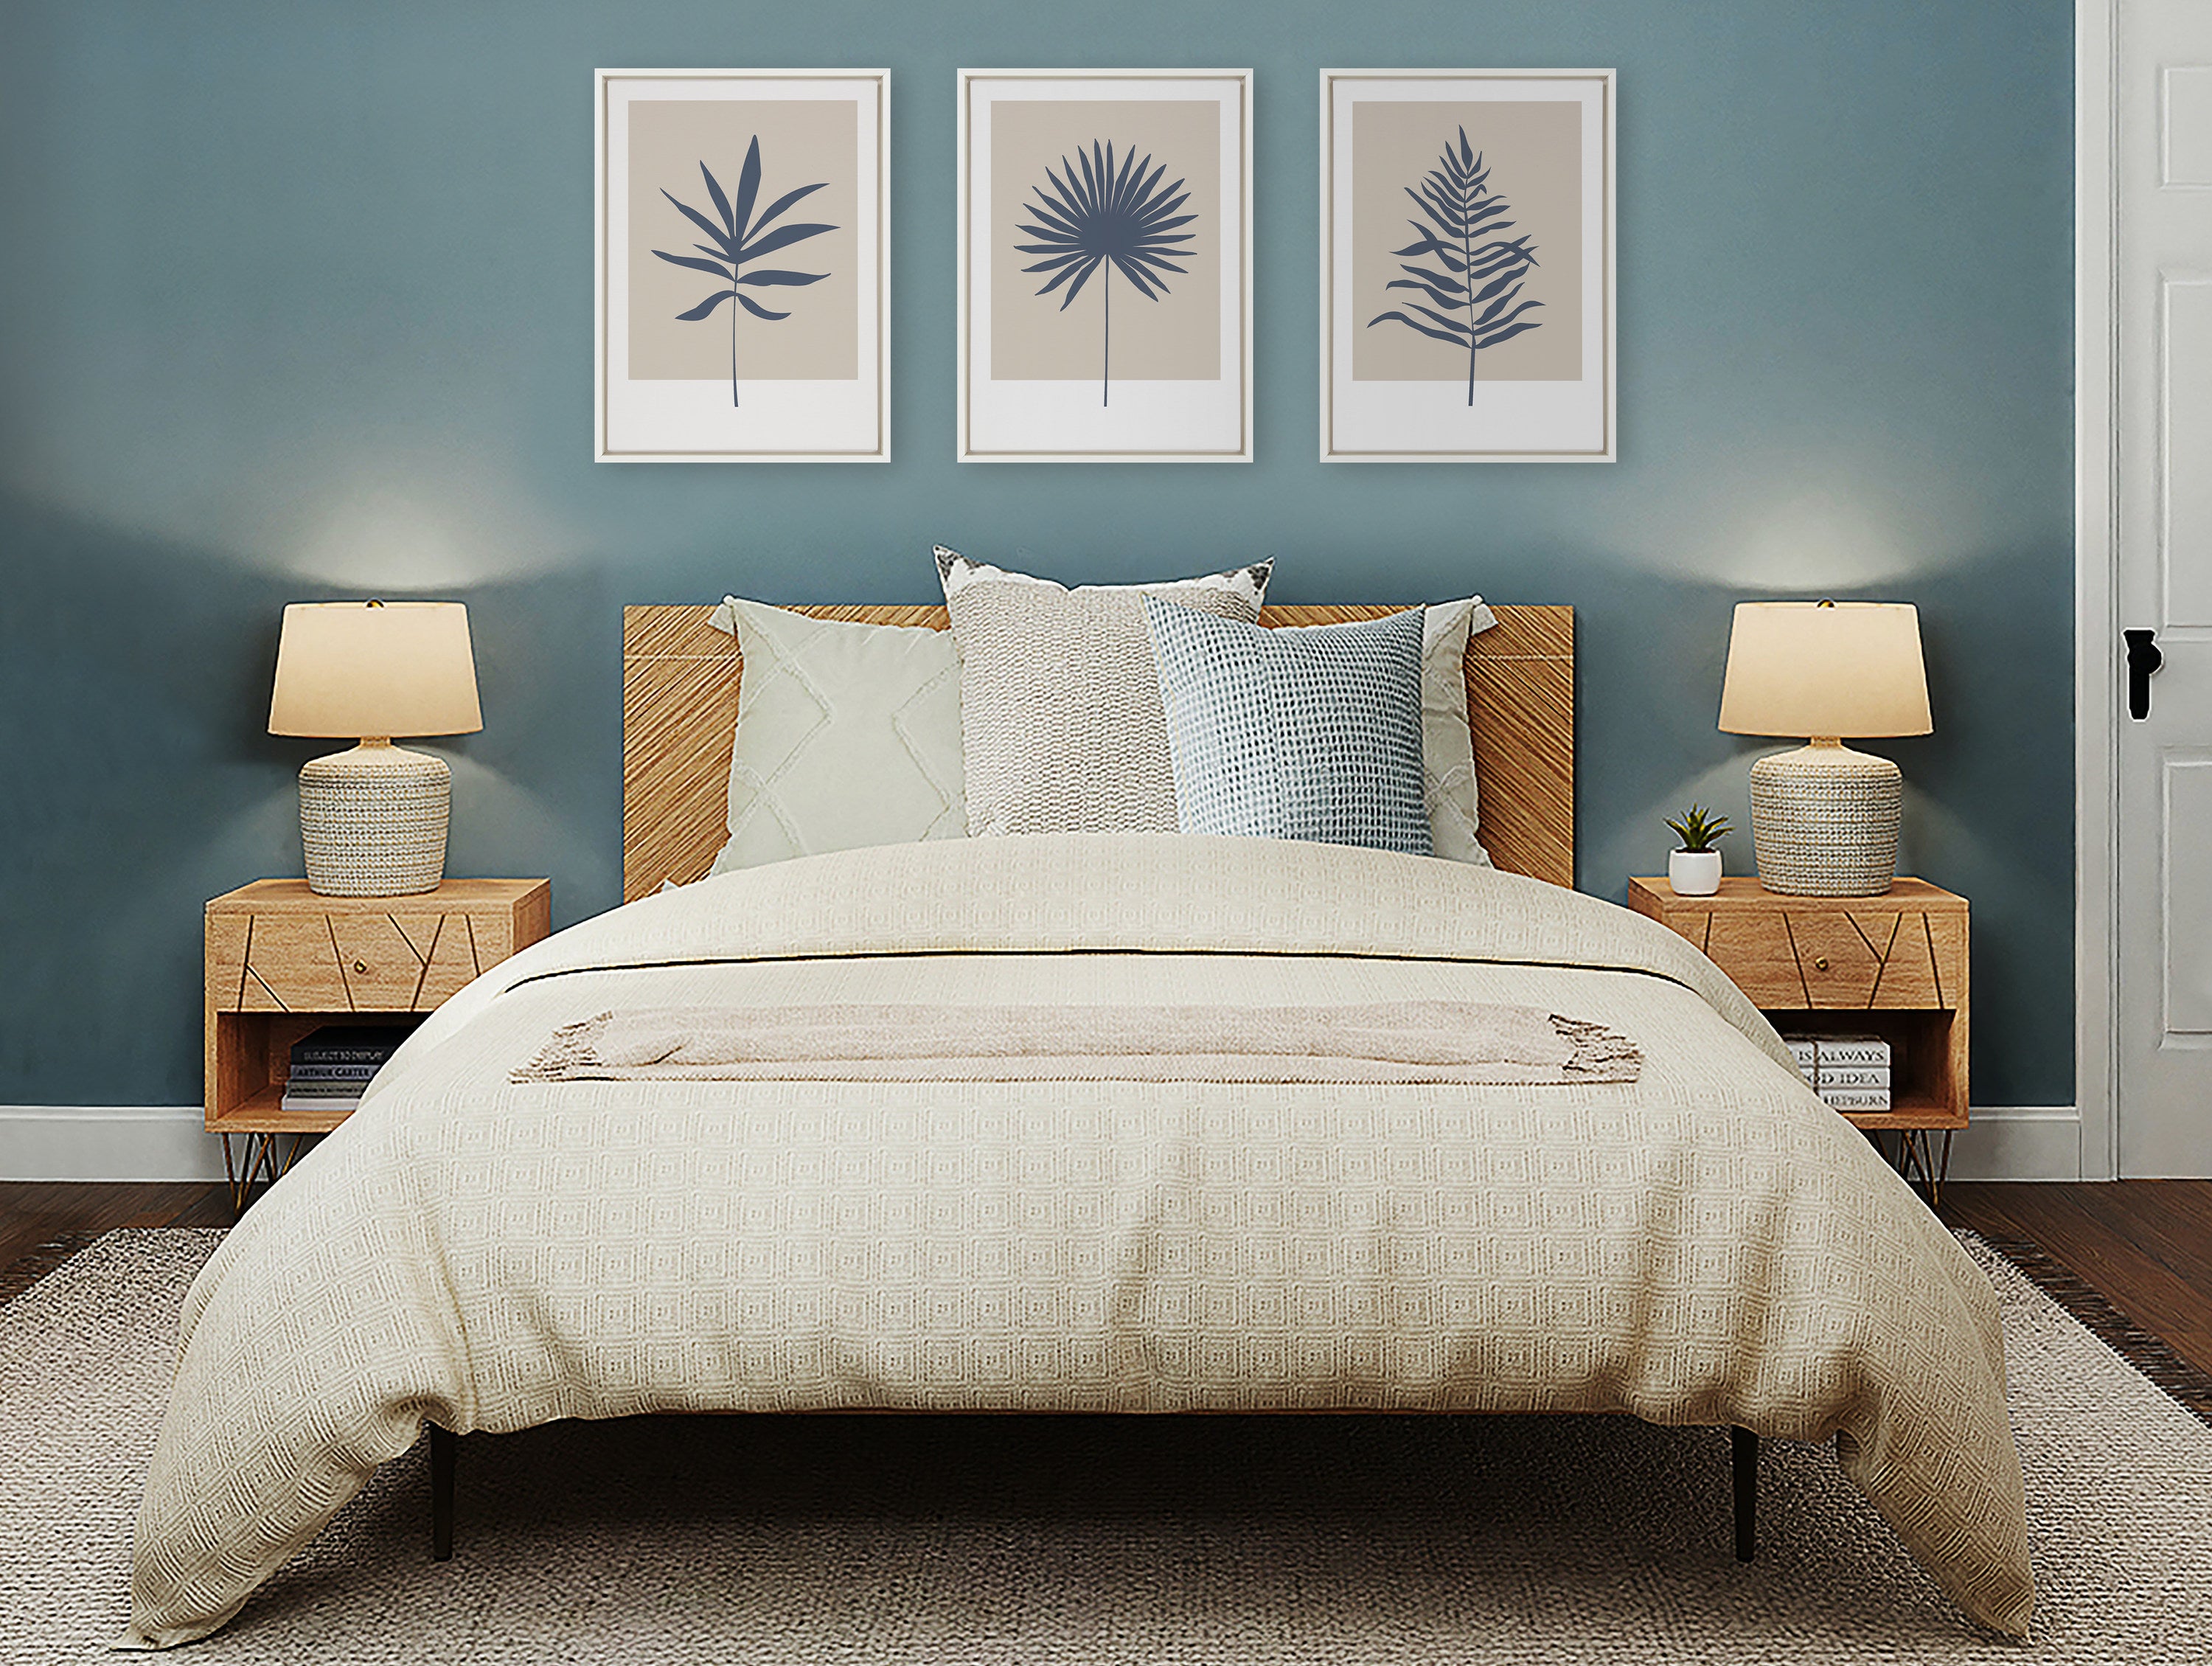 Sylvie Muted Tan and Blue Colorblock Botanical Fern Framed Canvas by The Creative Bunch Studio